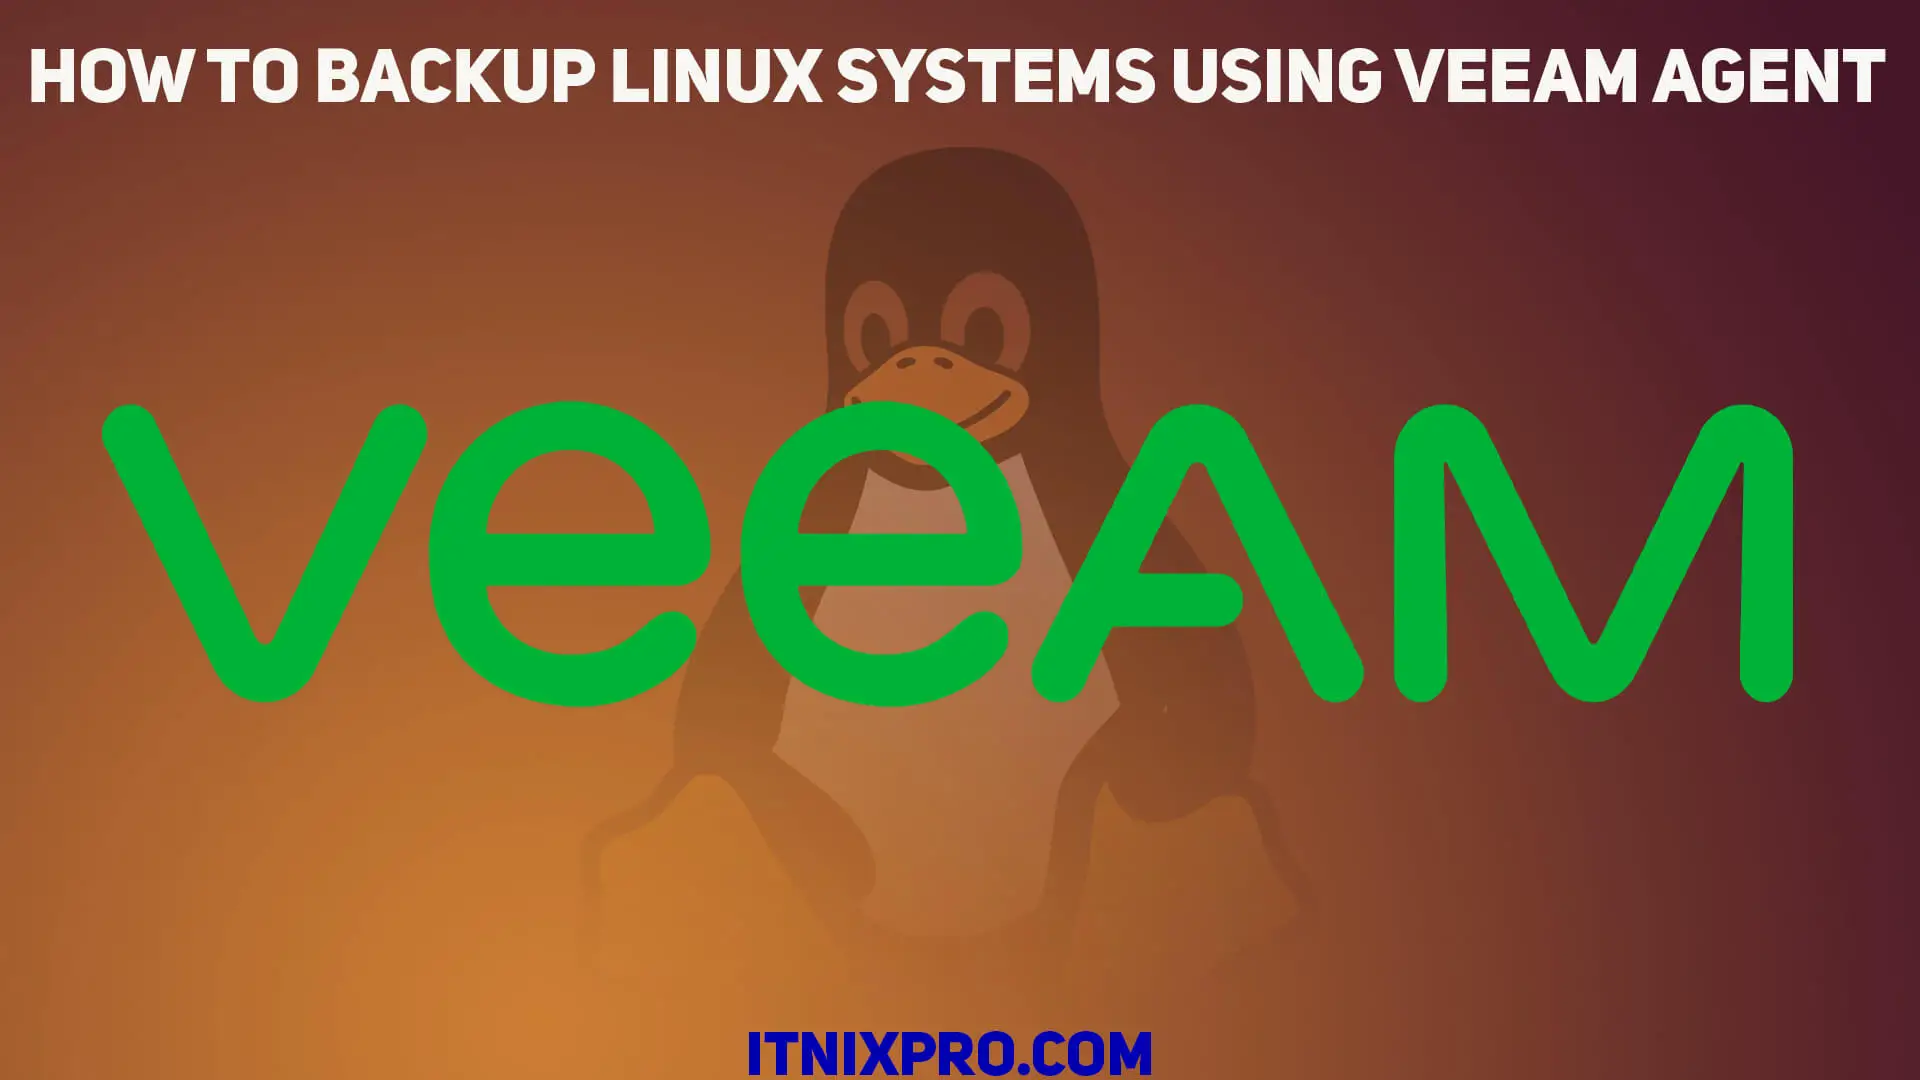 How to Backup Linux systems using Veeam Agent